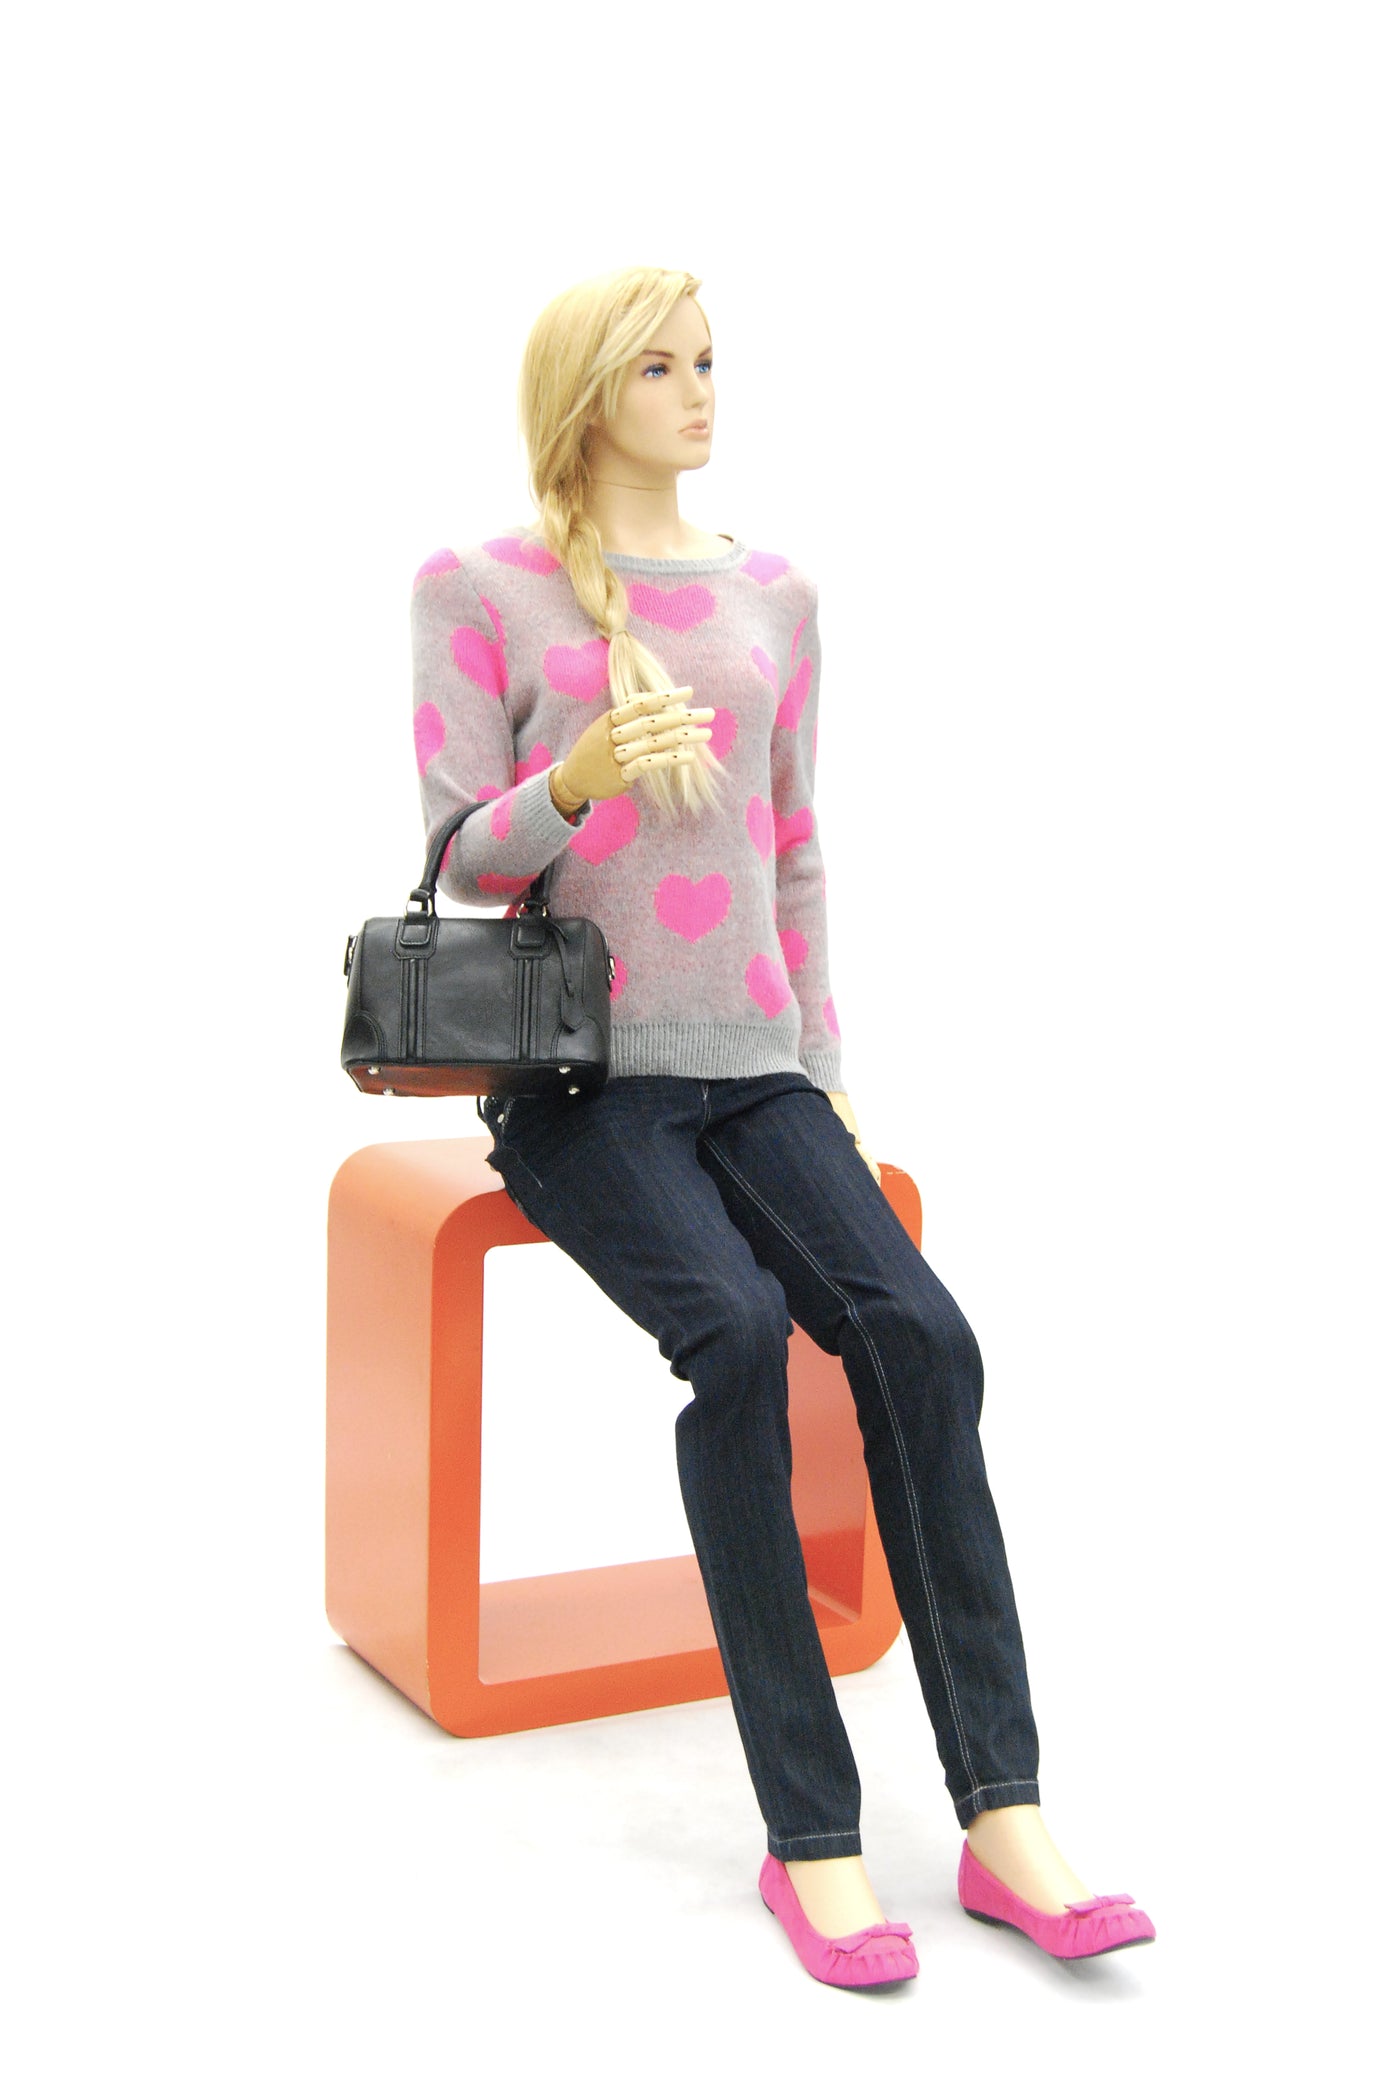 Articulated Realistic Female Mannequin 3